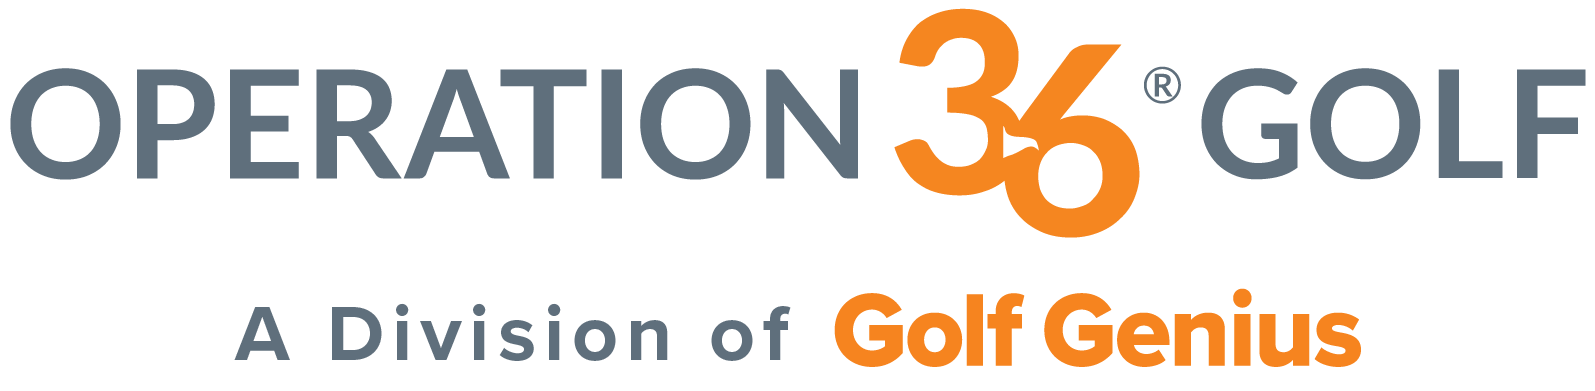 Operation 36 Golf - A Division of Golf Genius